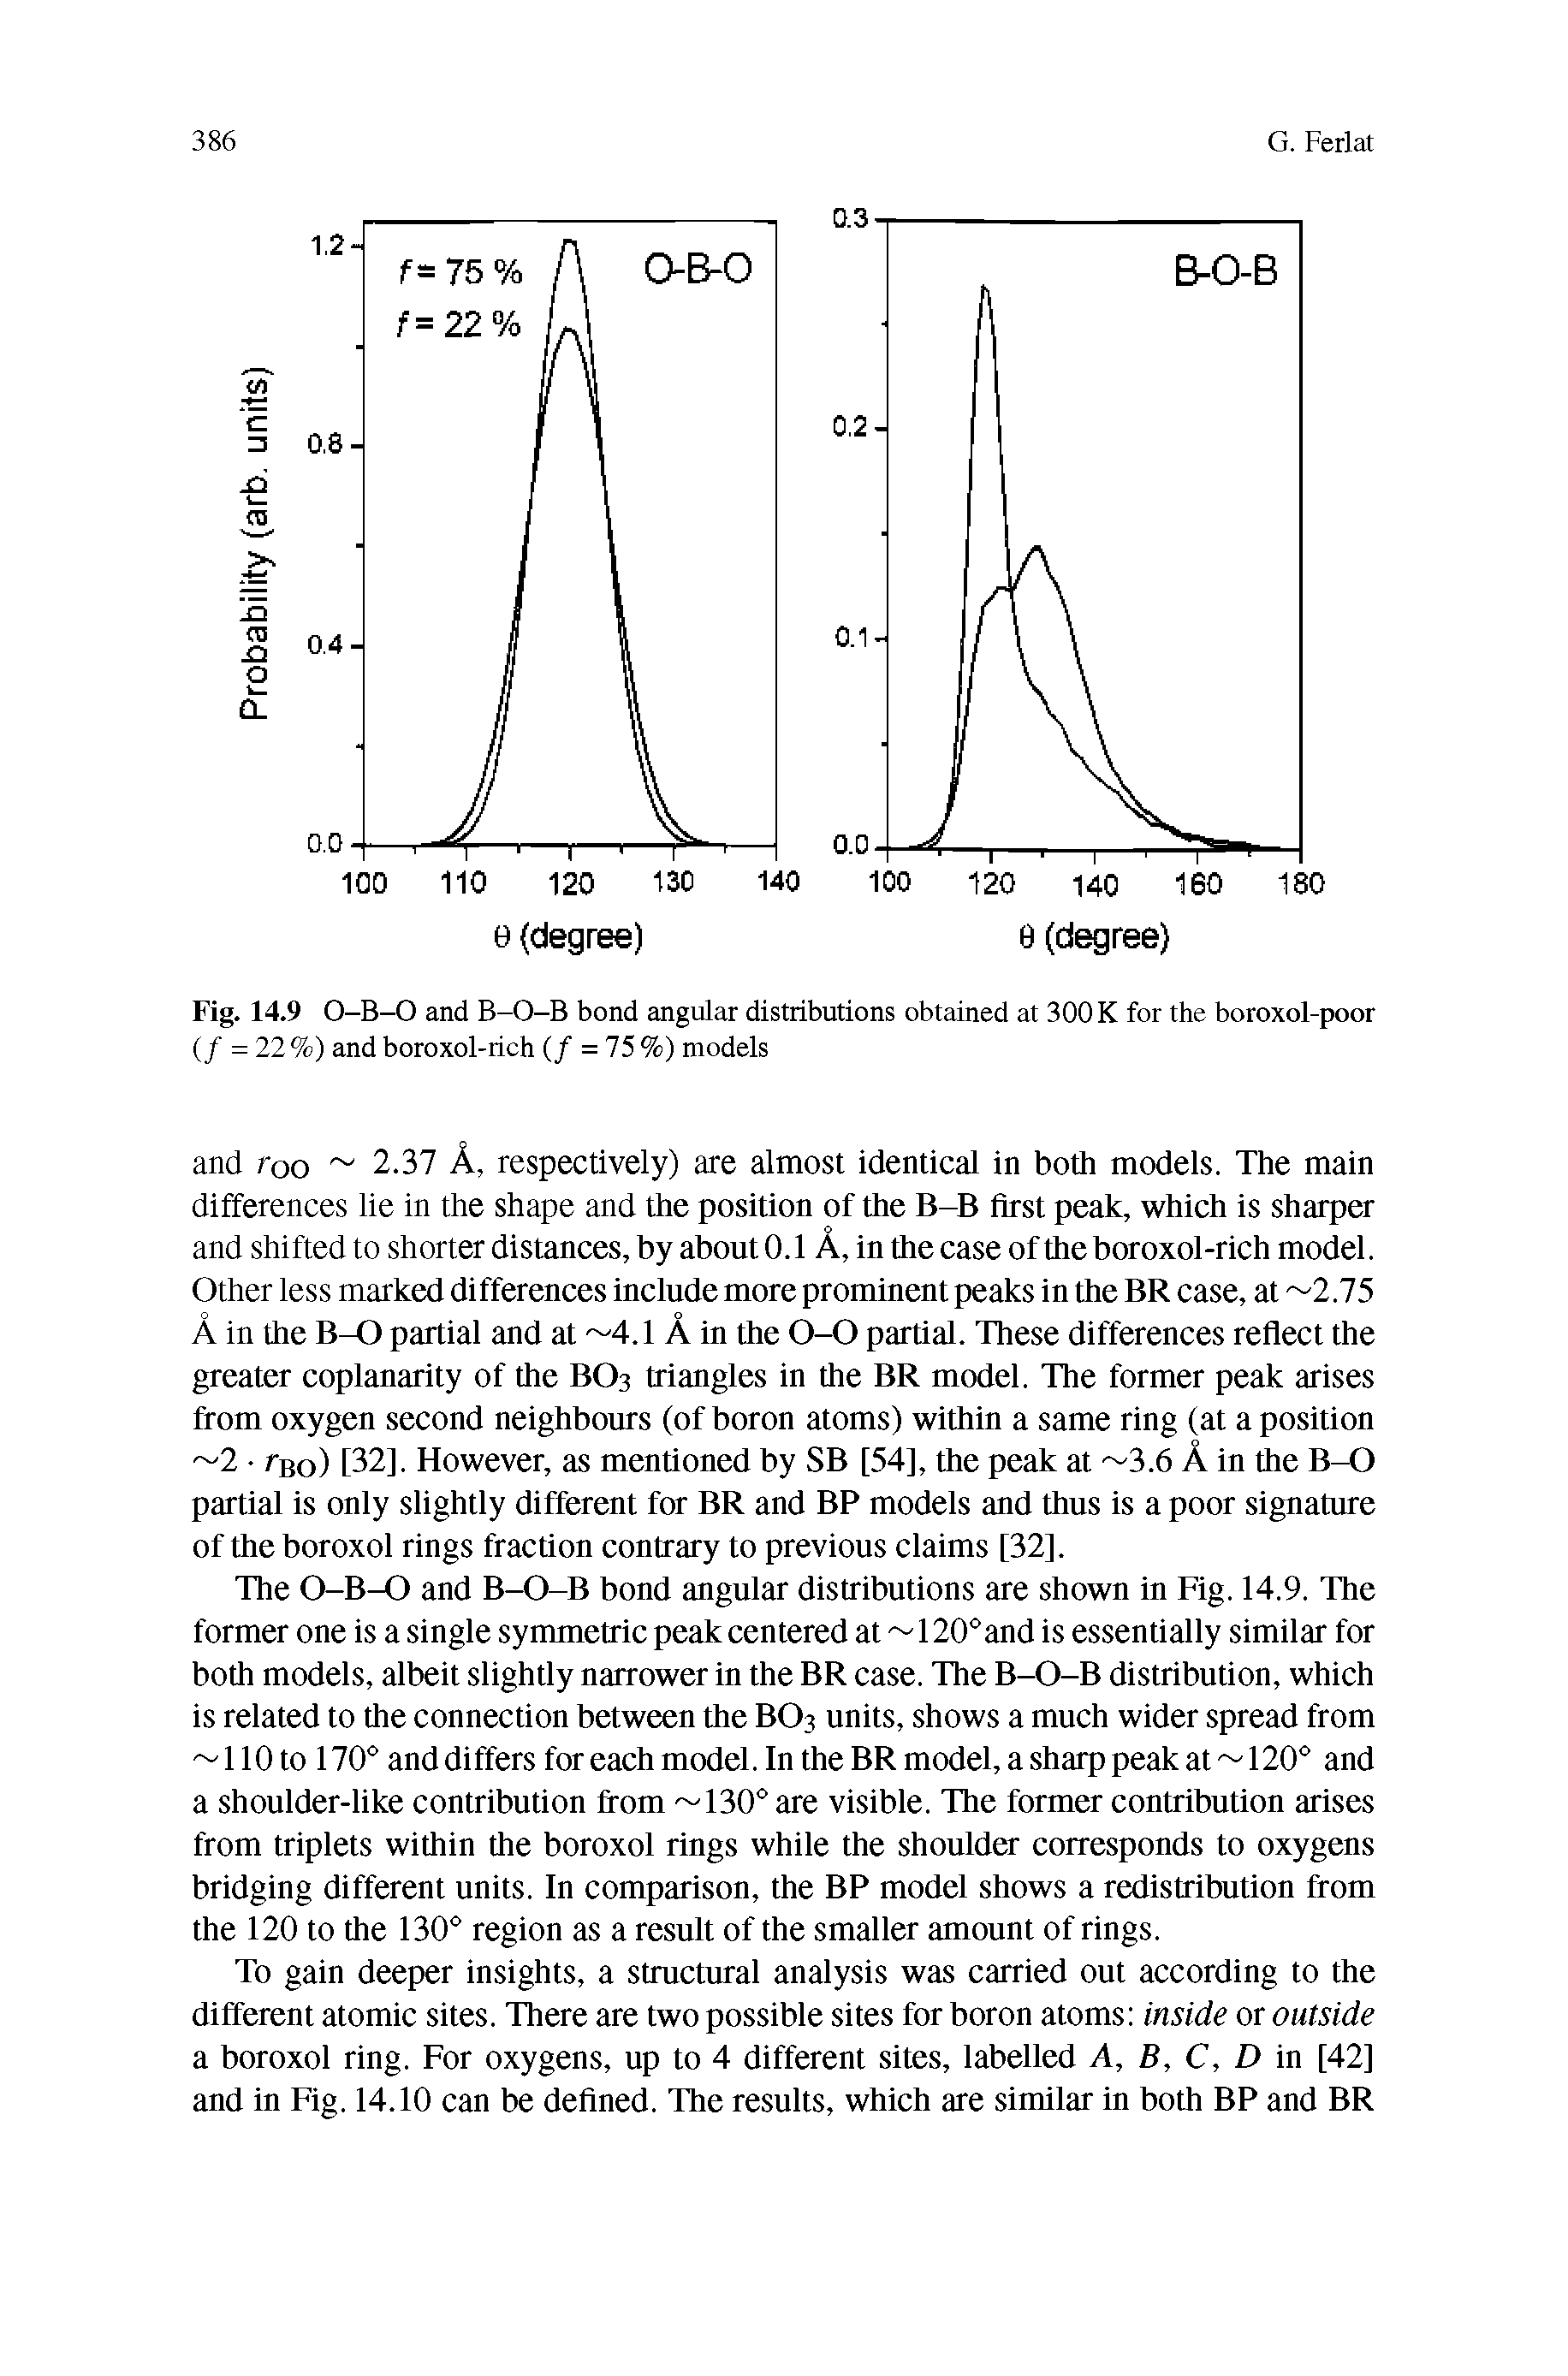 Fig. 14.9 O-B-0 and B-O-B bond angular distributions obtained at 300 K for the boroxol-poor (/ = 22%) and boroxol-rich (/ = 75 %) models...